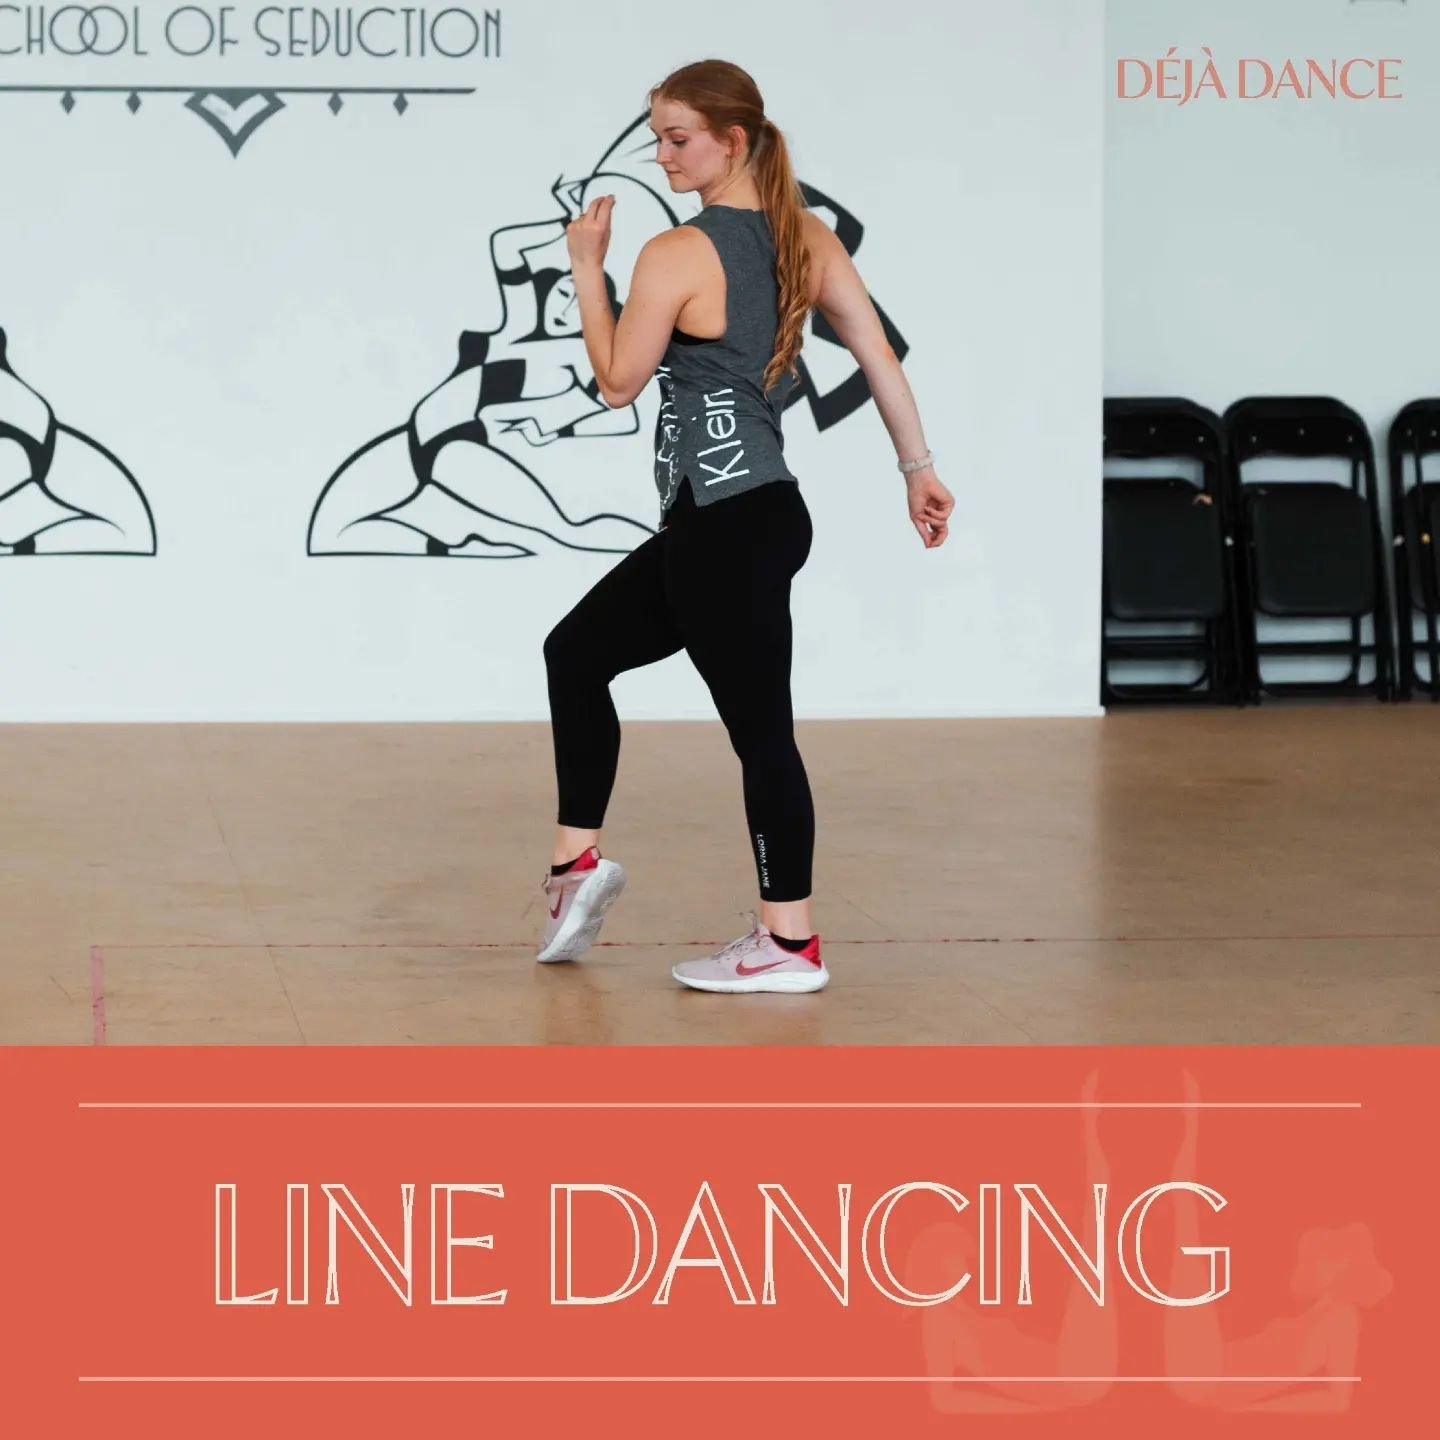 We're starting term 2 with something a bit different, we've got a one-off class of line dancing! We'll be learning the iconic line dance from the Footloose movie (2011) plus a couple of other routines

Wednesdays 6-7pm 
Corps de Burlesque studio 
$15